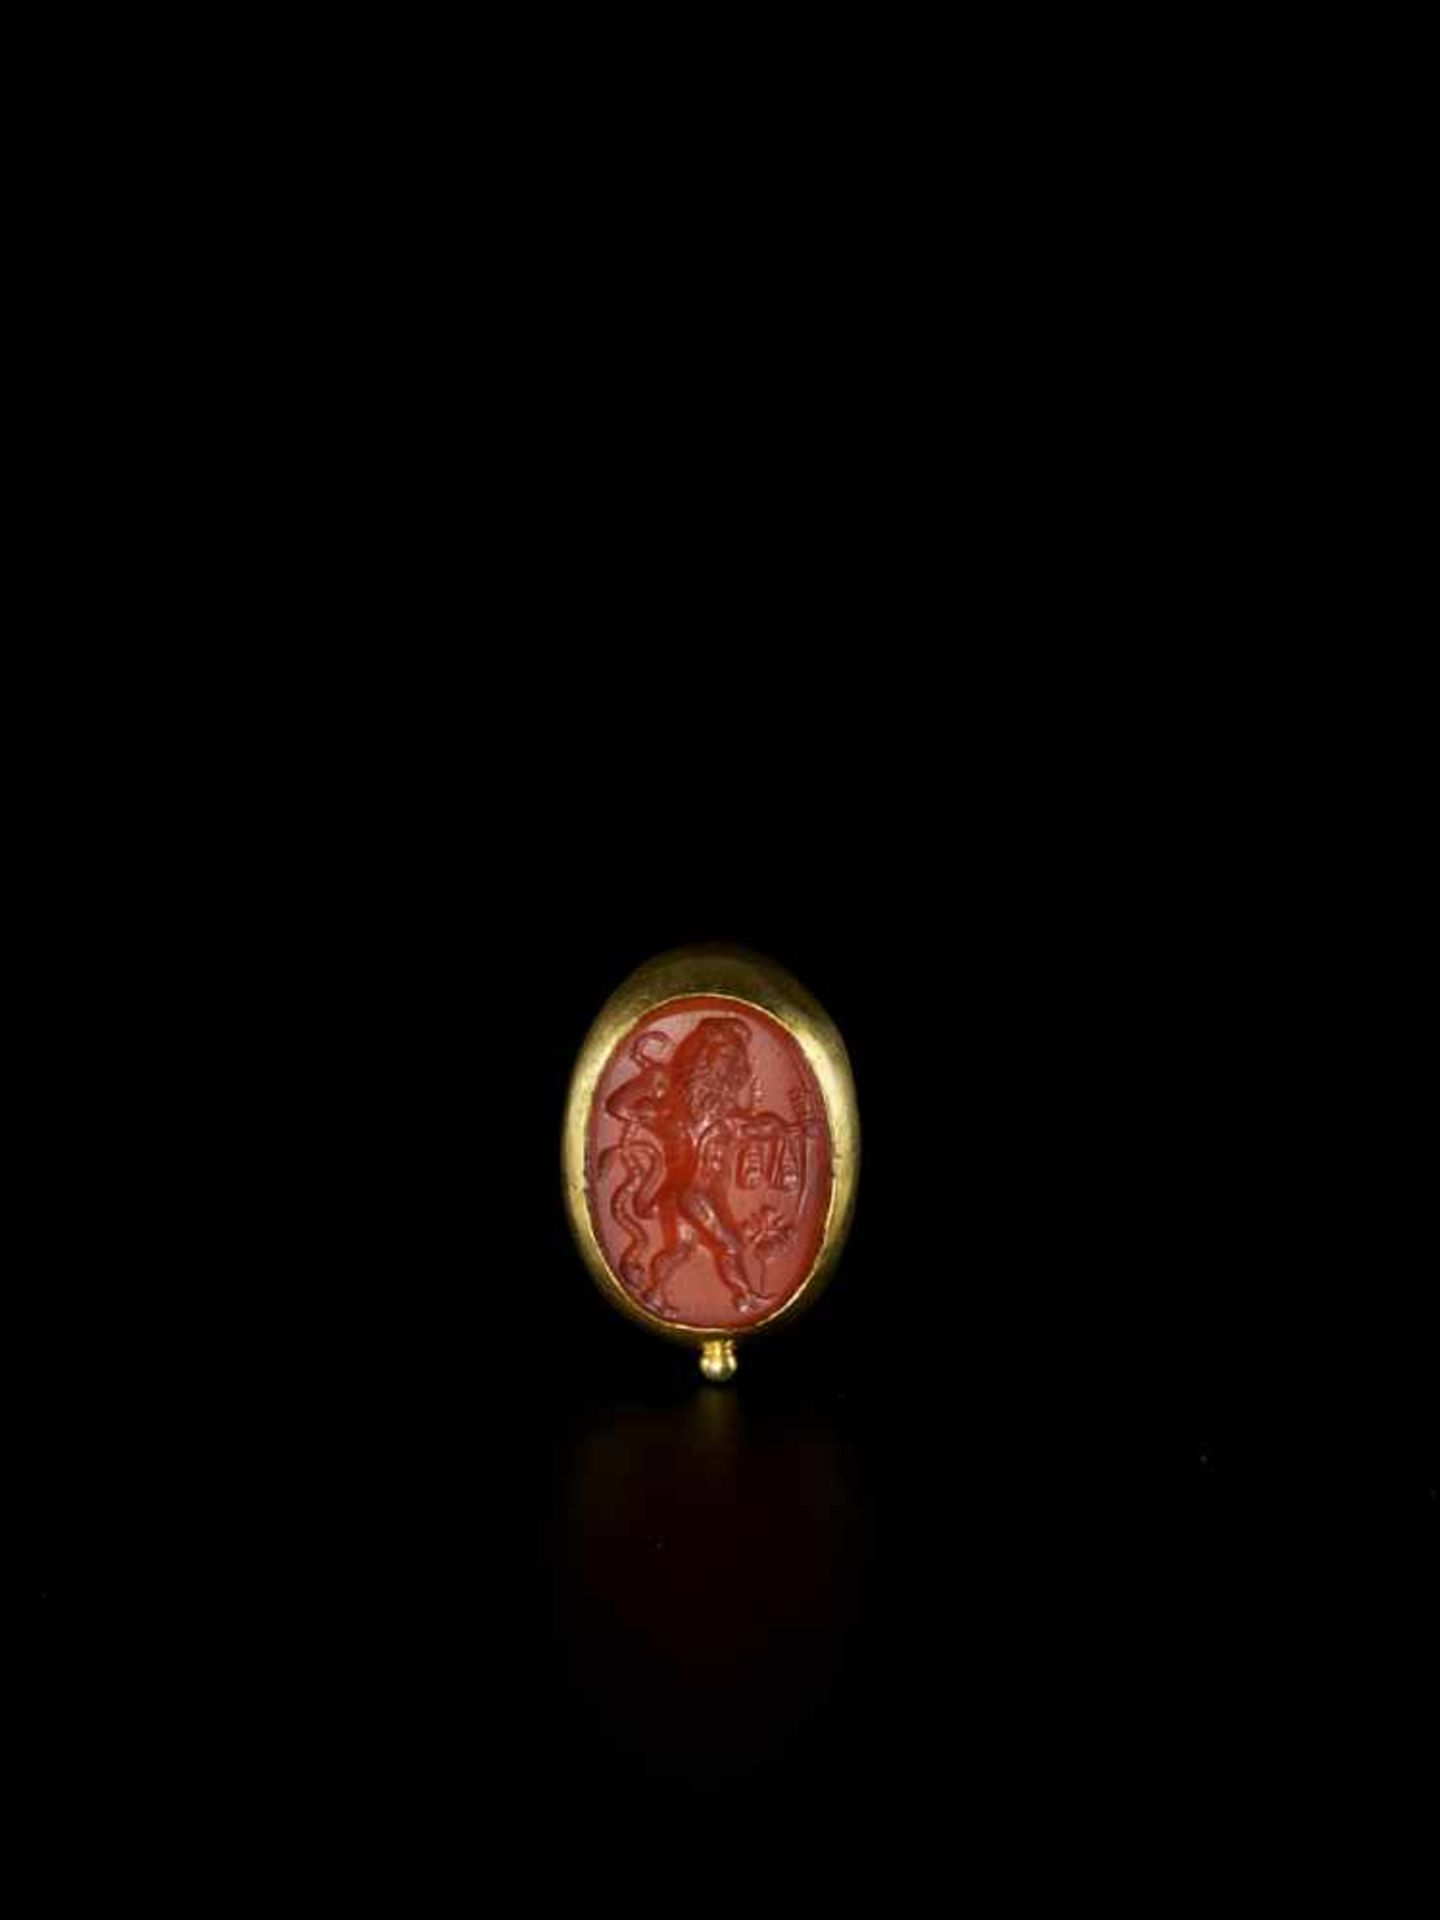 A MASSIVE CHAM GOLD RING WITH A LARGE RED CARNELIAN INTAGLIO Champa, c. 9th – 10th century. The